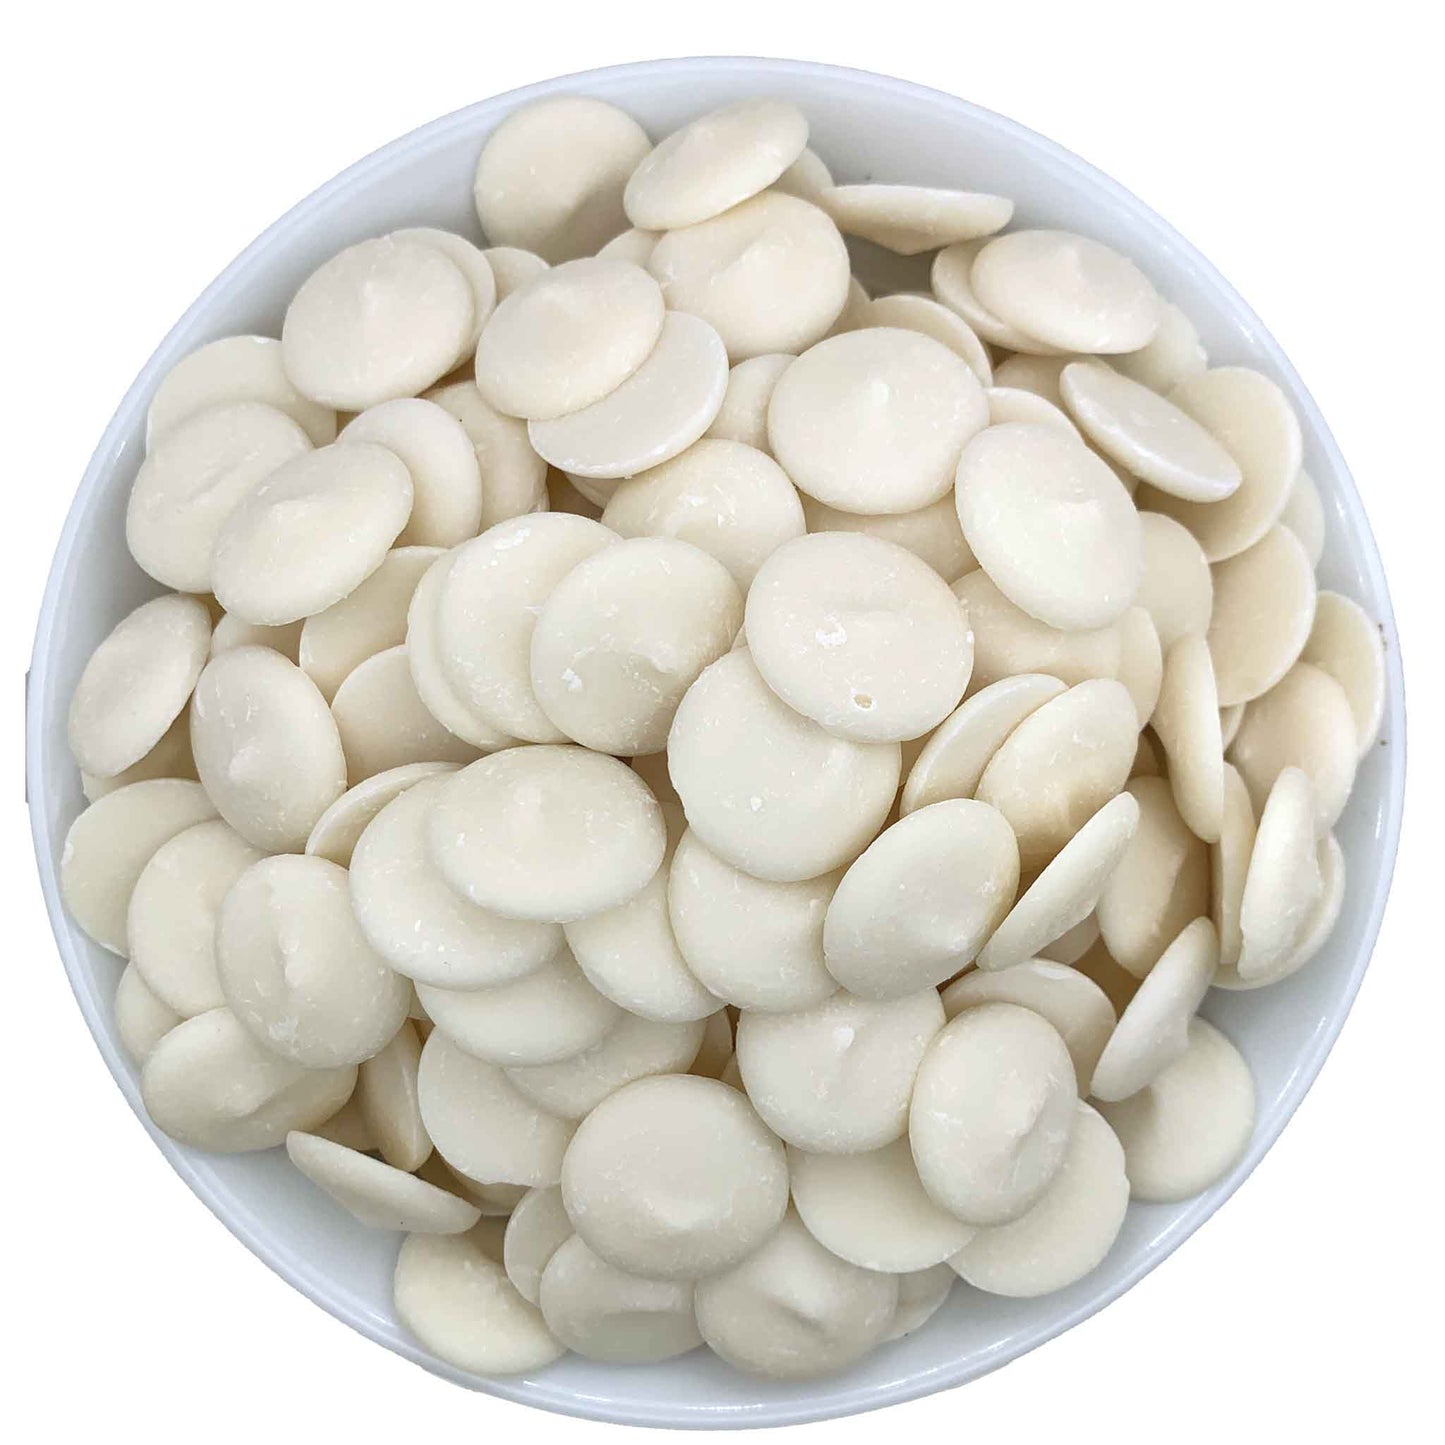 Full white bowl of pristine, round Vegan and dairy free white chocolate candy melts, ideal for creating creamy confections and exquisite chocolate treats, presented on a white background.